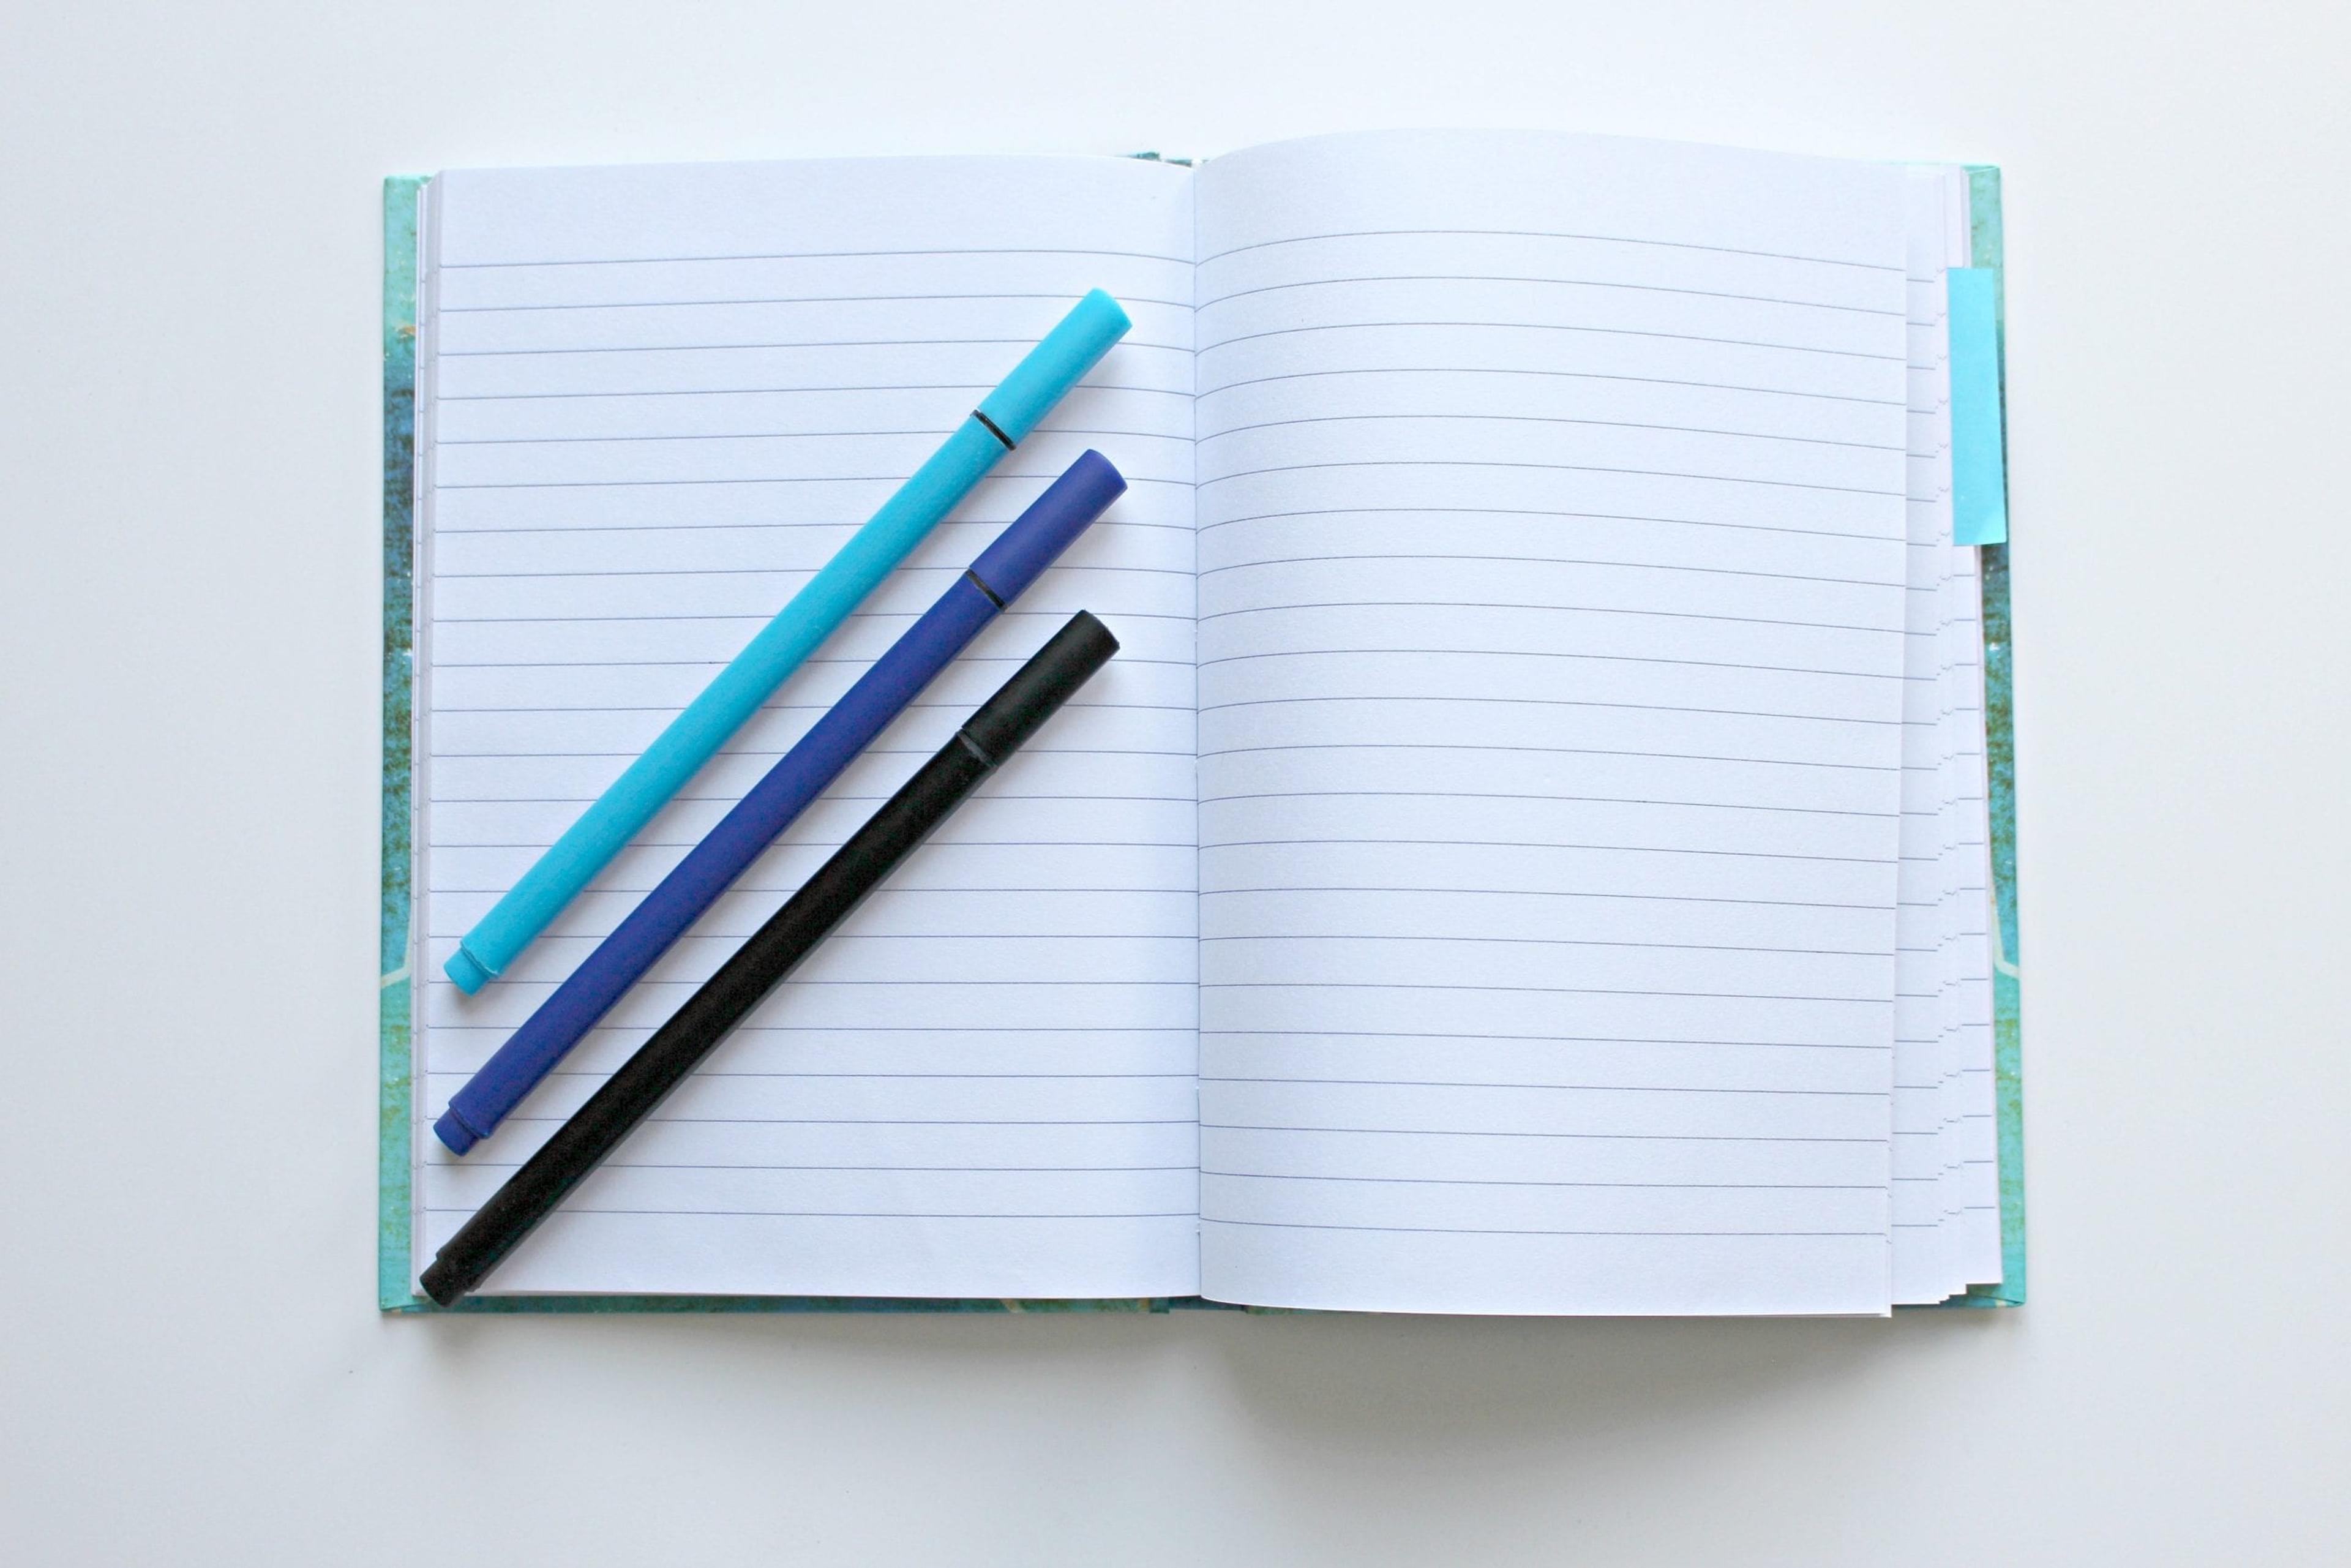 A notebook lays open with pens on the page